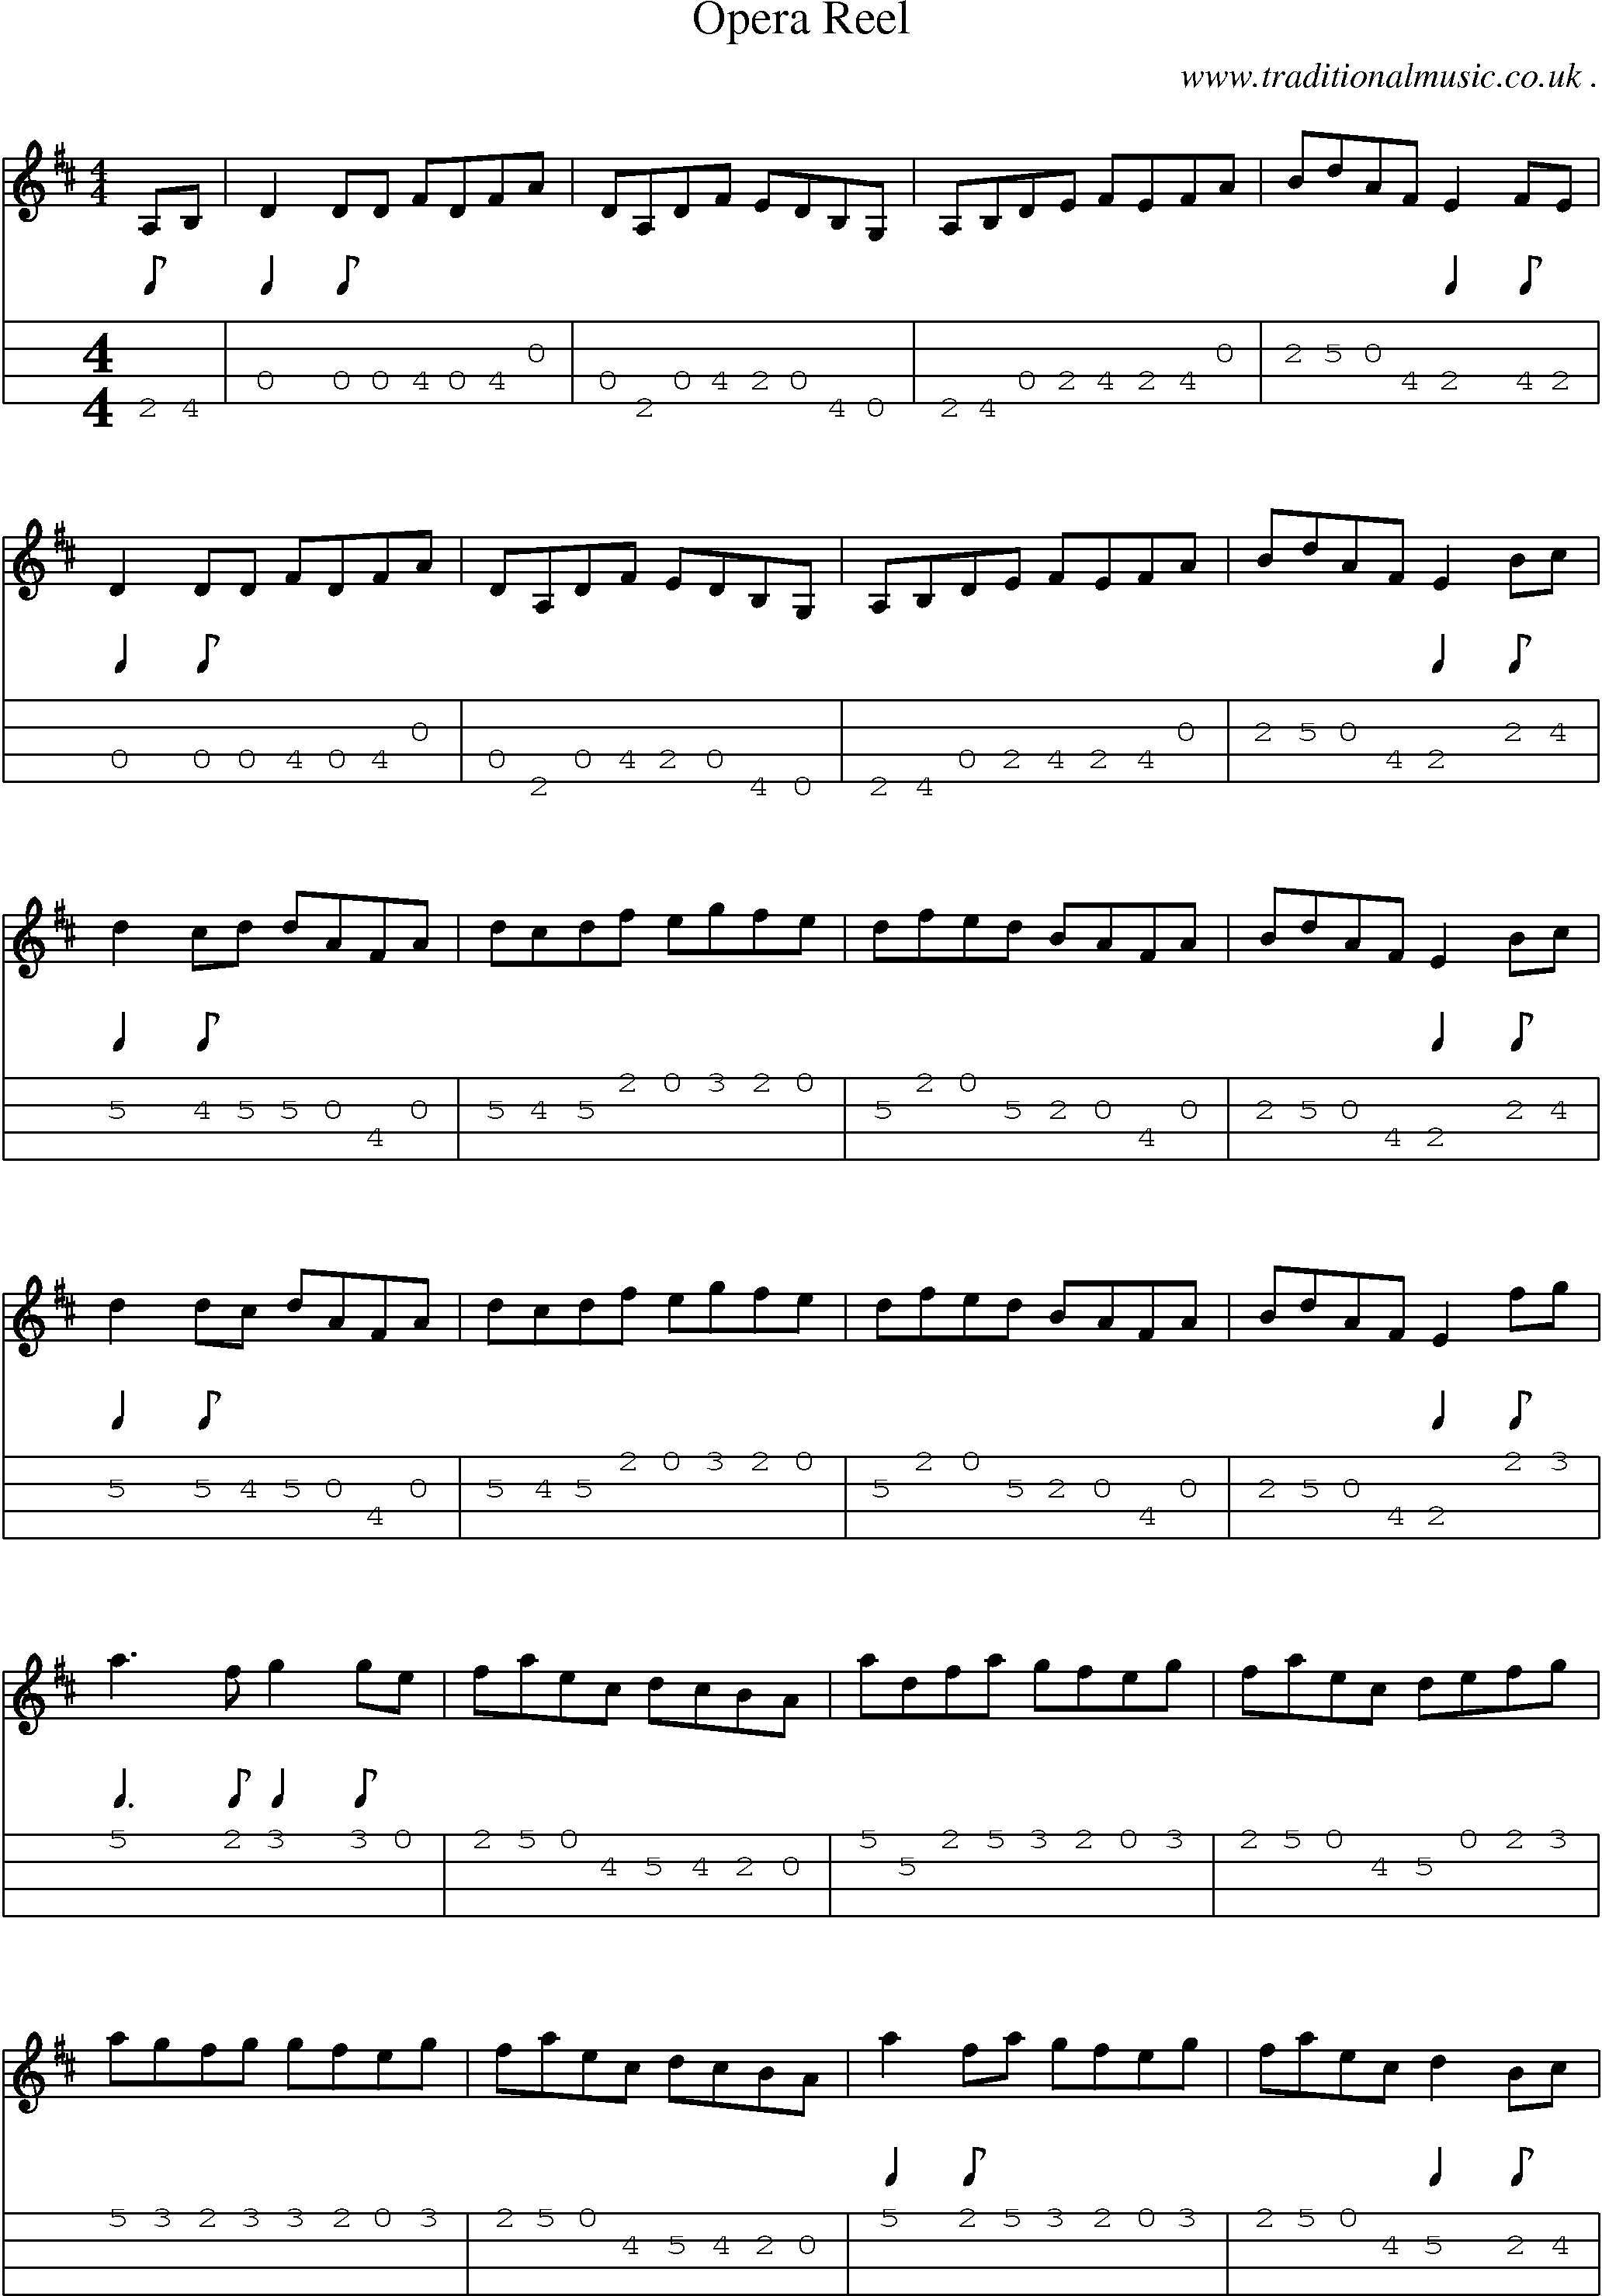 Music Score and Guitar Tabs for Opera Reel